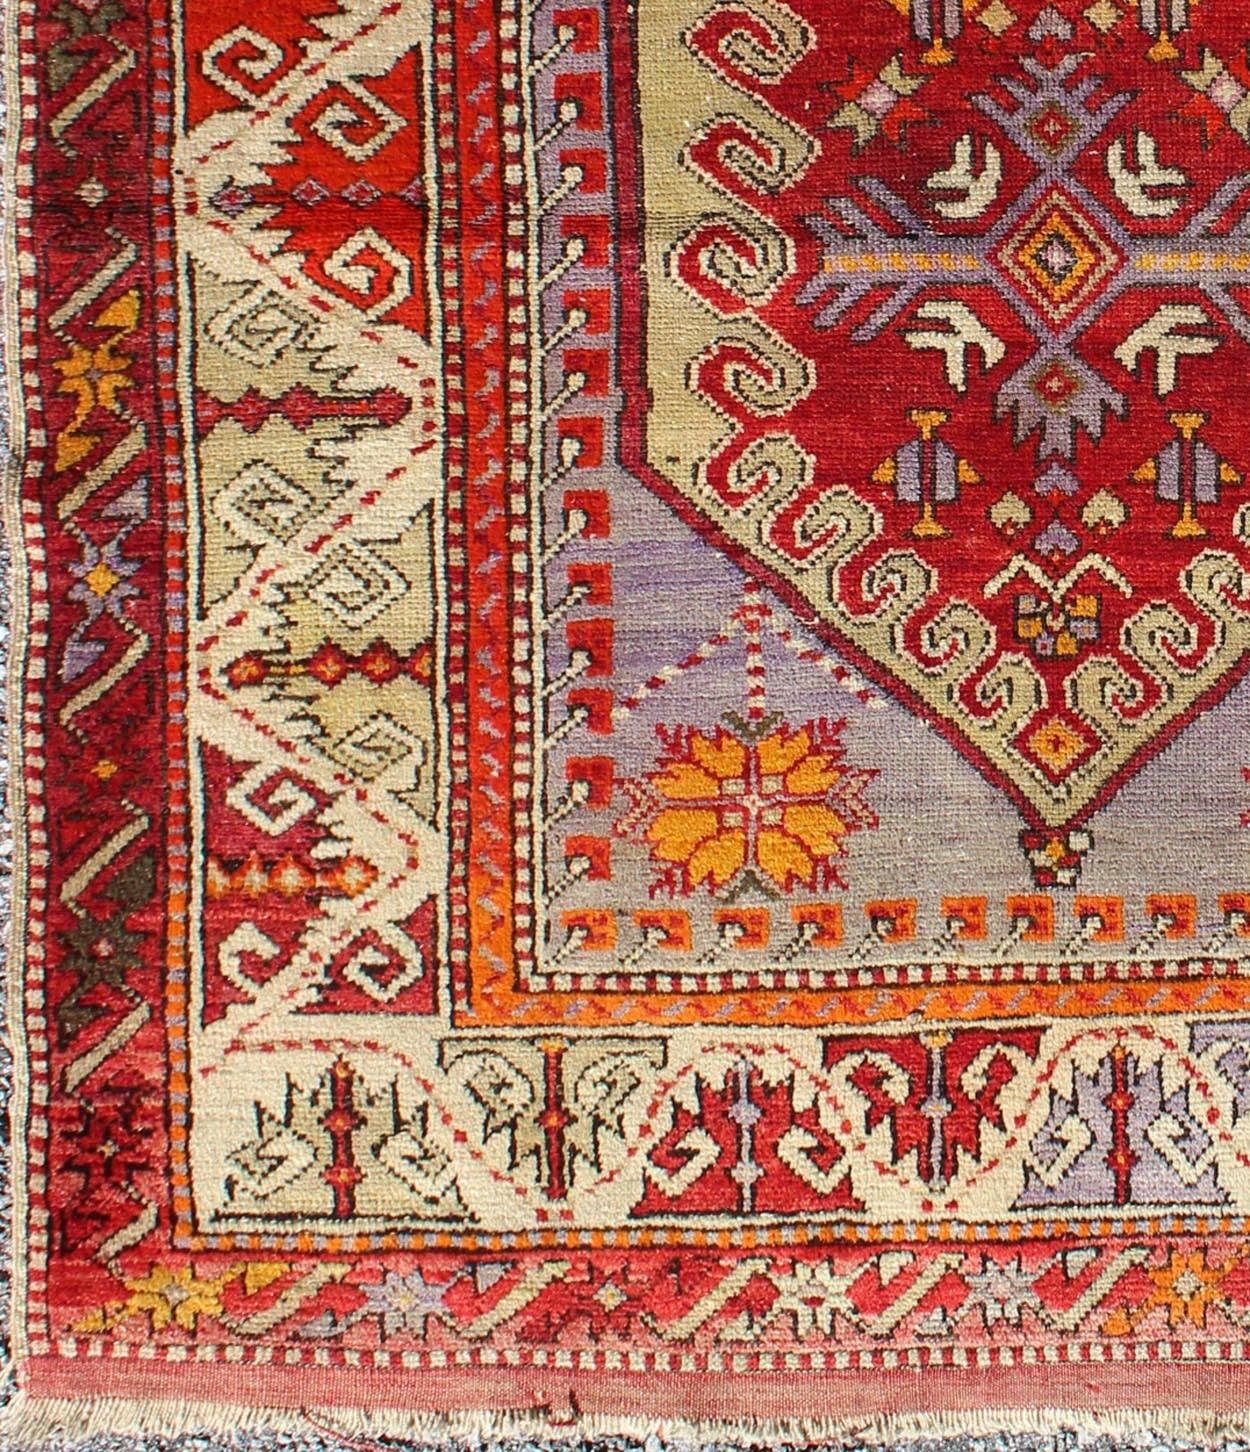 Colorful early 20th century antique Turkish Oushak rug with Medallion in Purple, rug j10-0402, country of origin / type: Turkey / Oushak, circa 1930

This antique Oushak rug features an intricate and complex design paired with a unique color